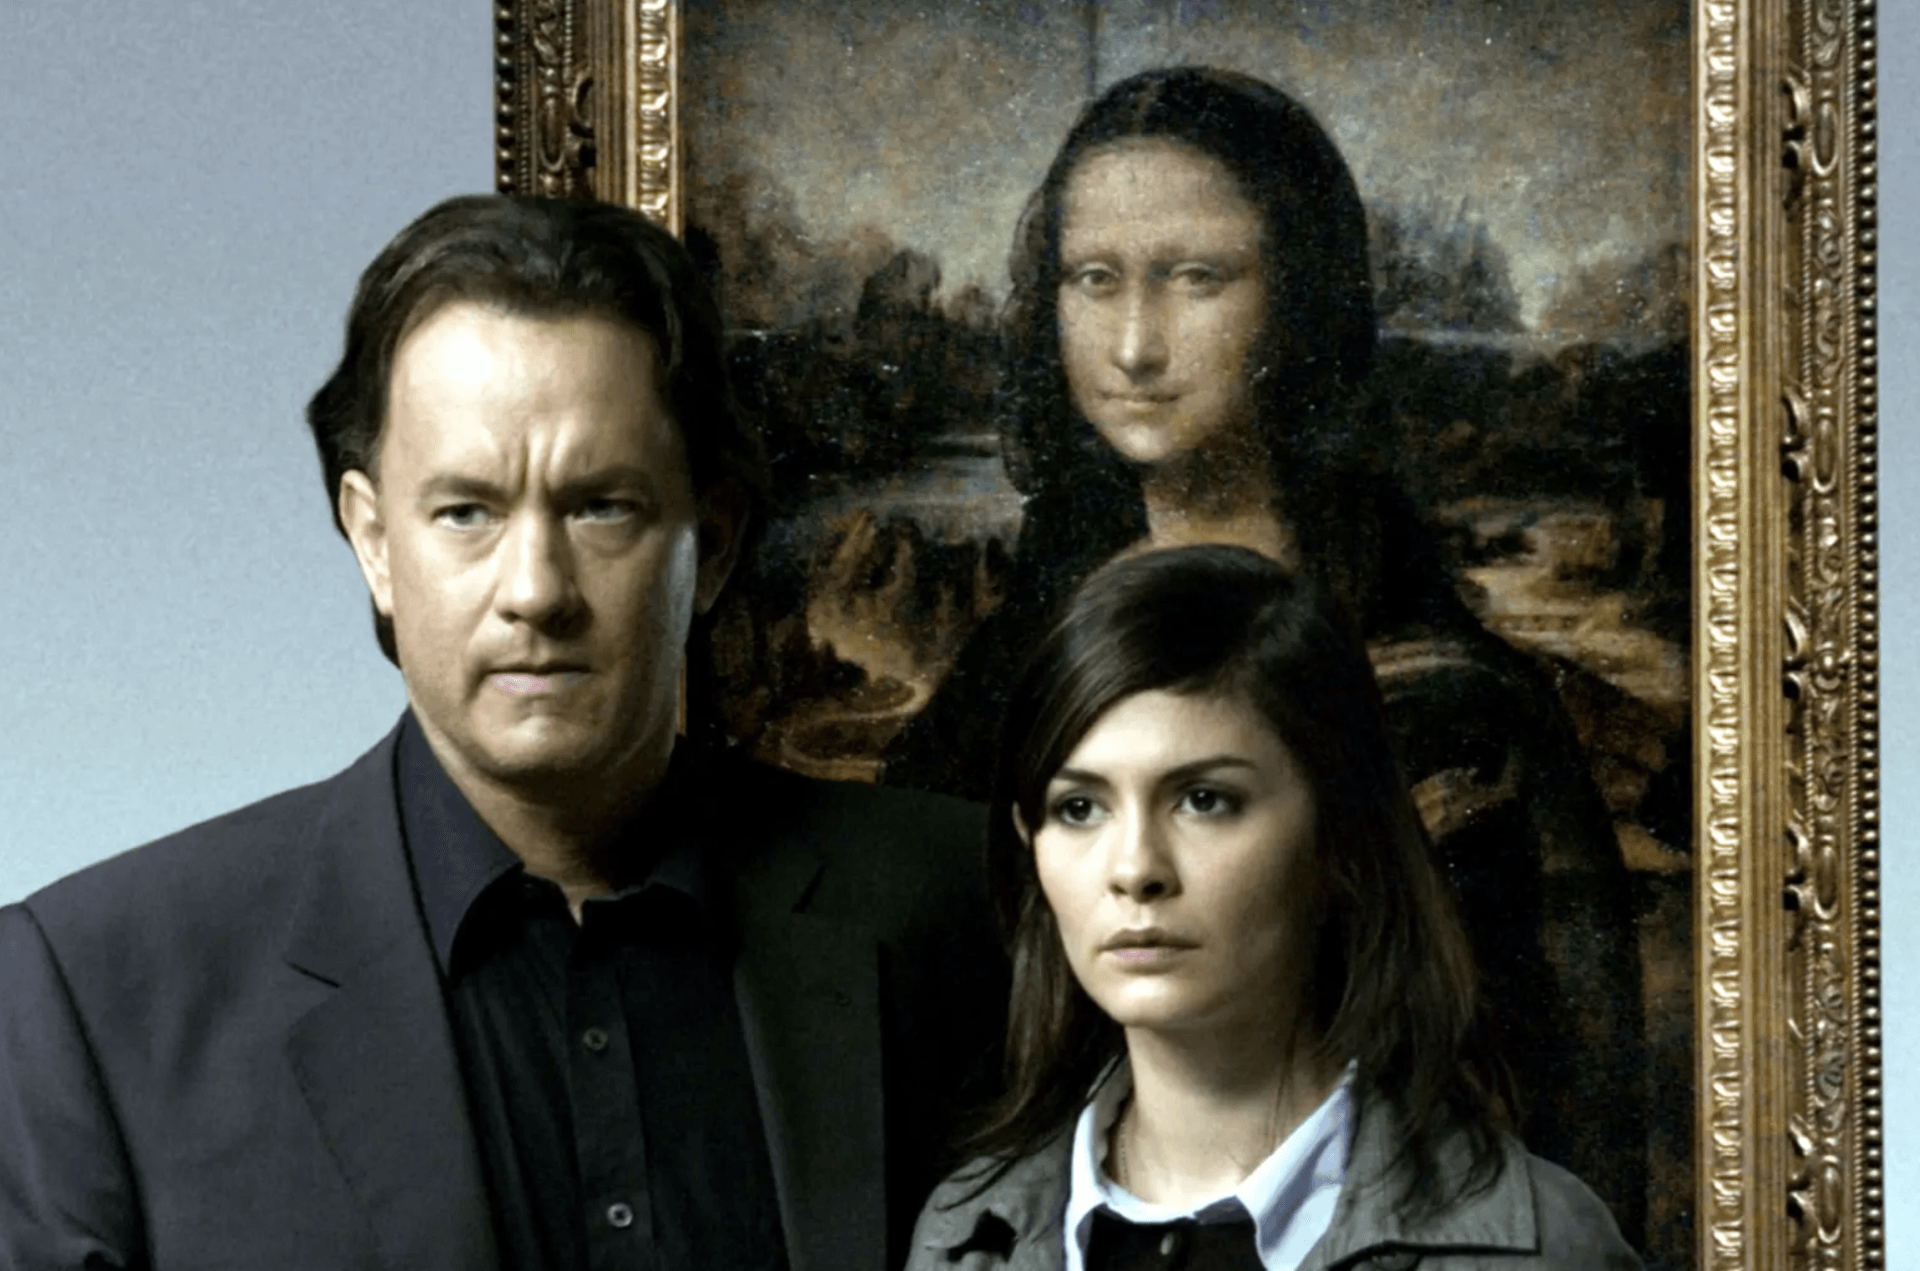 Tom Hanks and Audrey Tautou in “The Da Vinci Code” in 2006. ©Columbia Pictures/courtesy Everett Collection